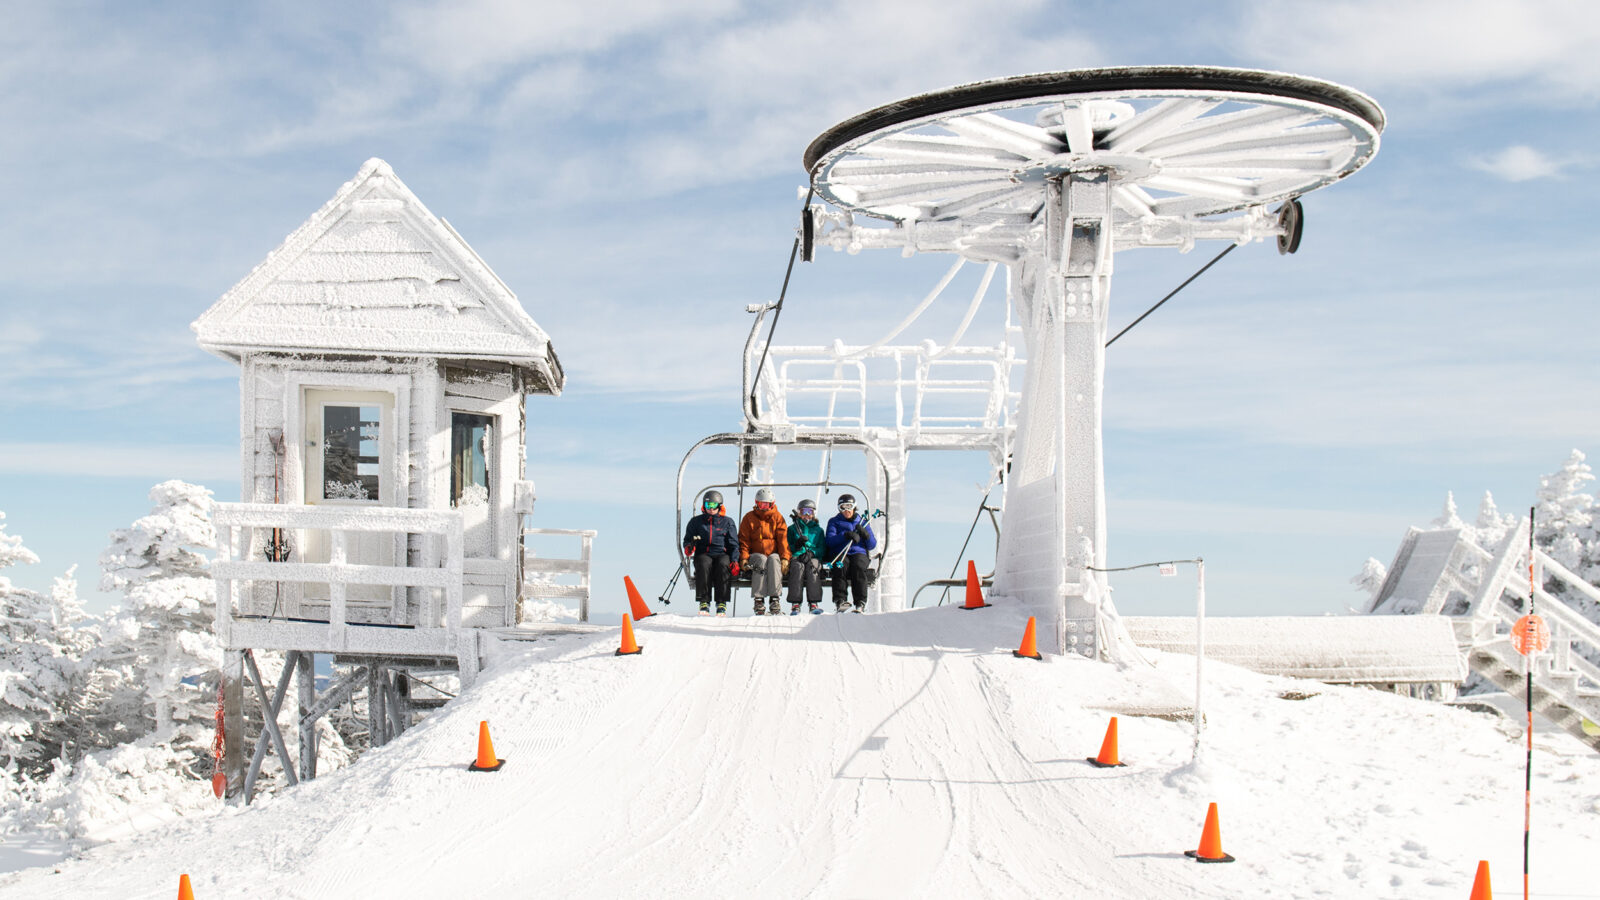 four people on the chair of a ski lift